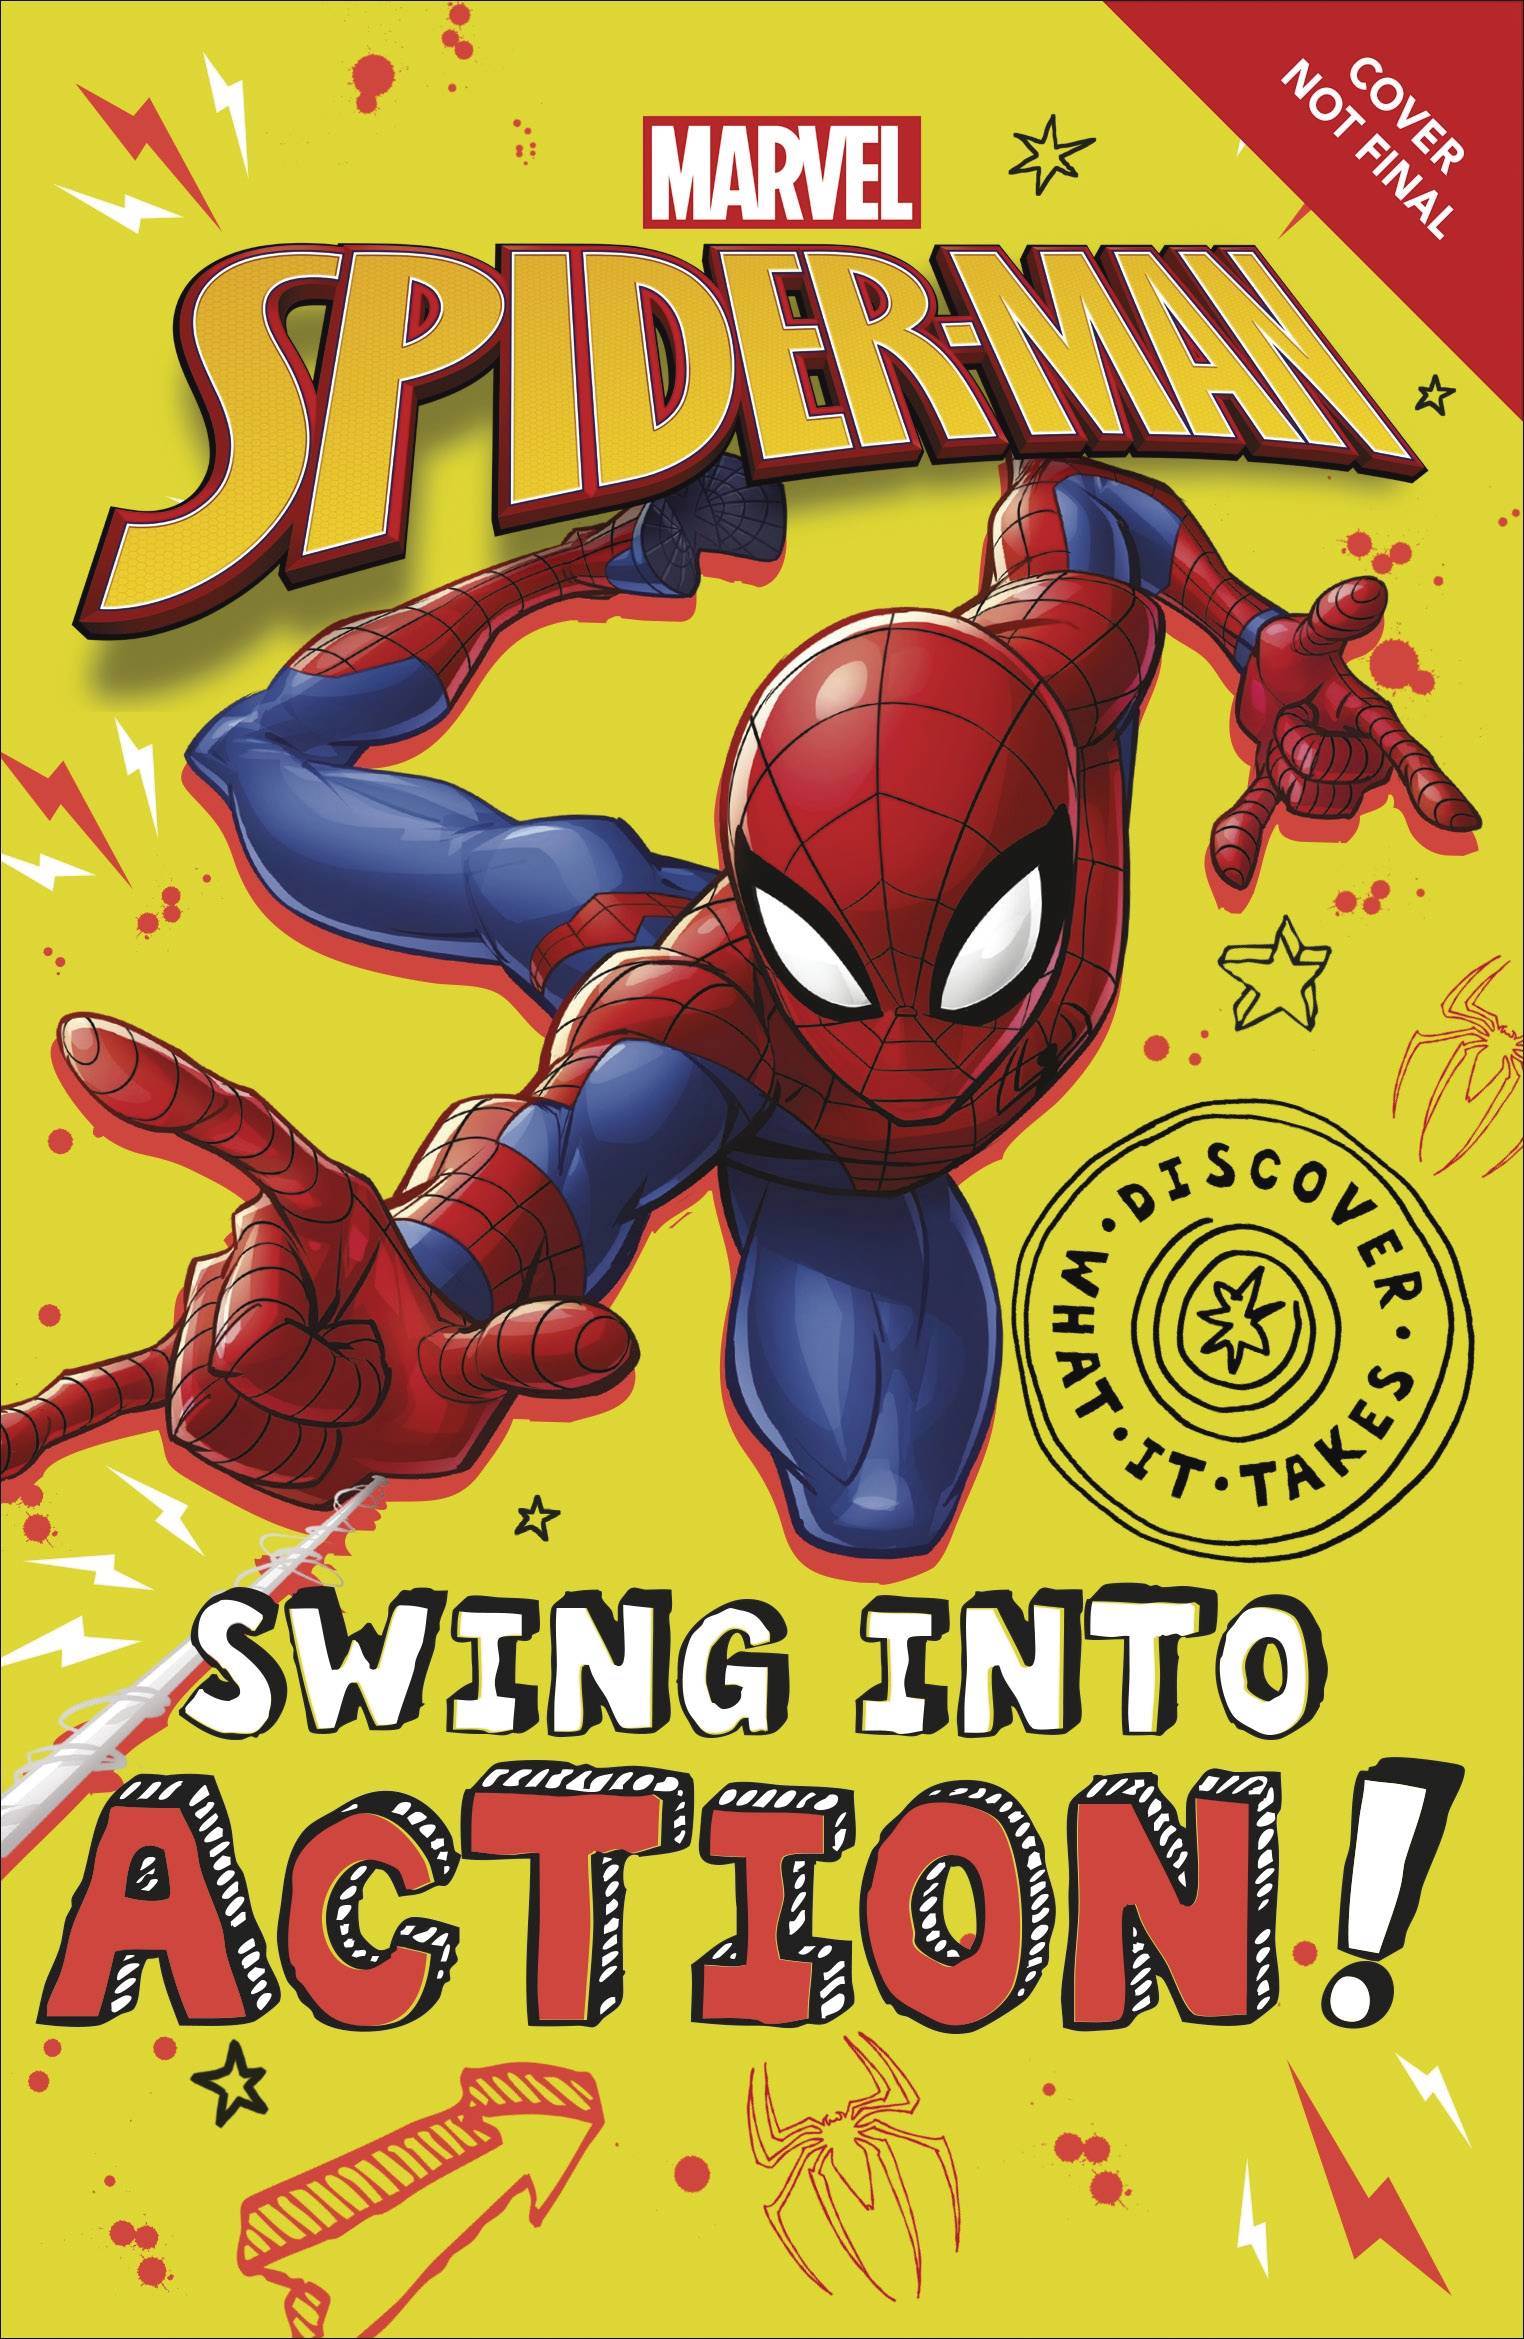 MARVEL SPIDER-MAN SWING INTO ACTION SC